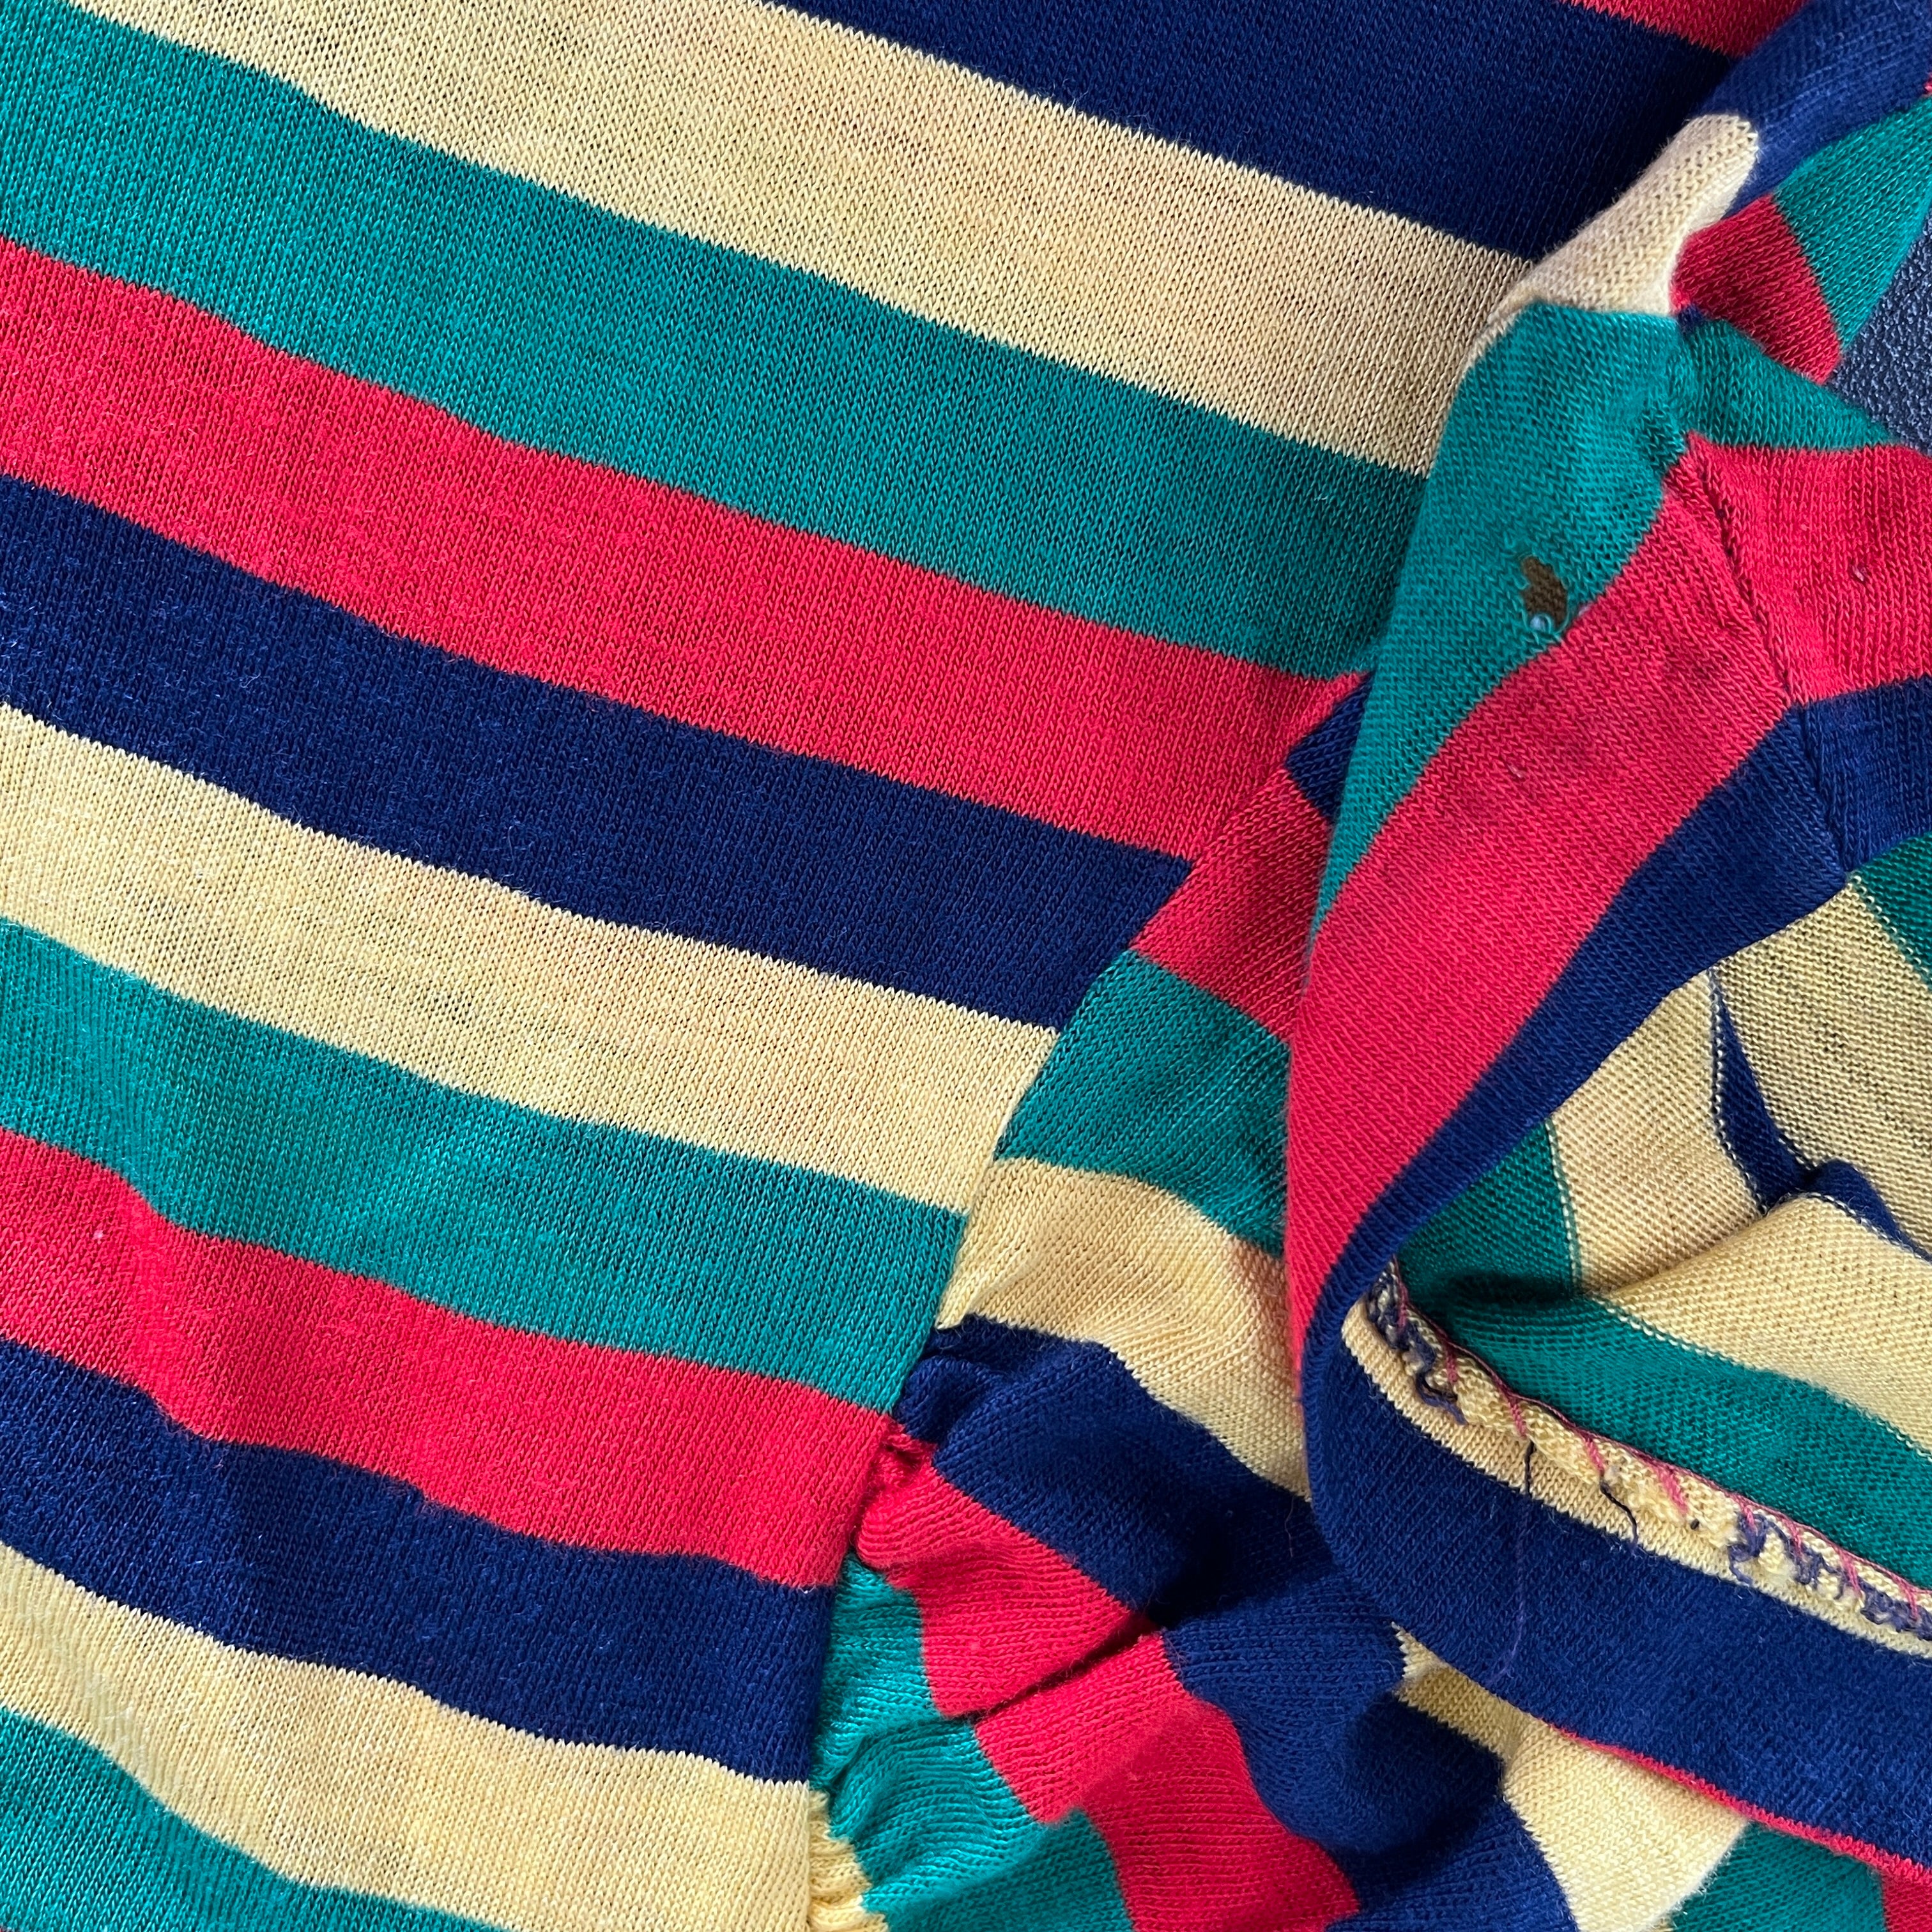 1960/70s Thin Striped T-Shirt with Puffy Sleeves.